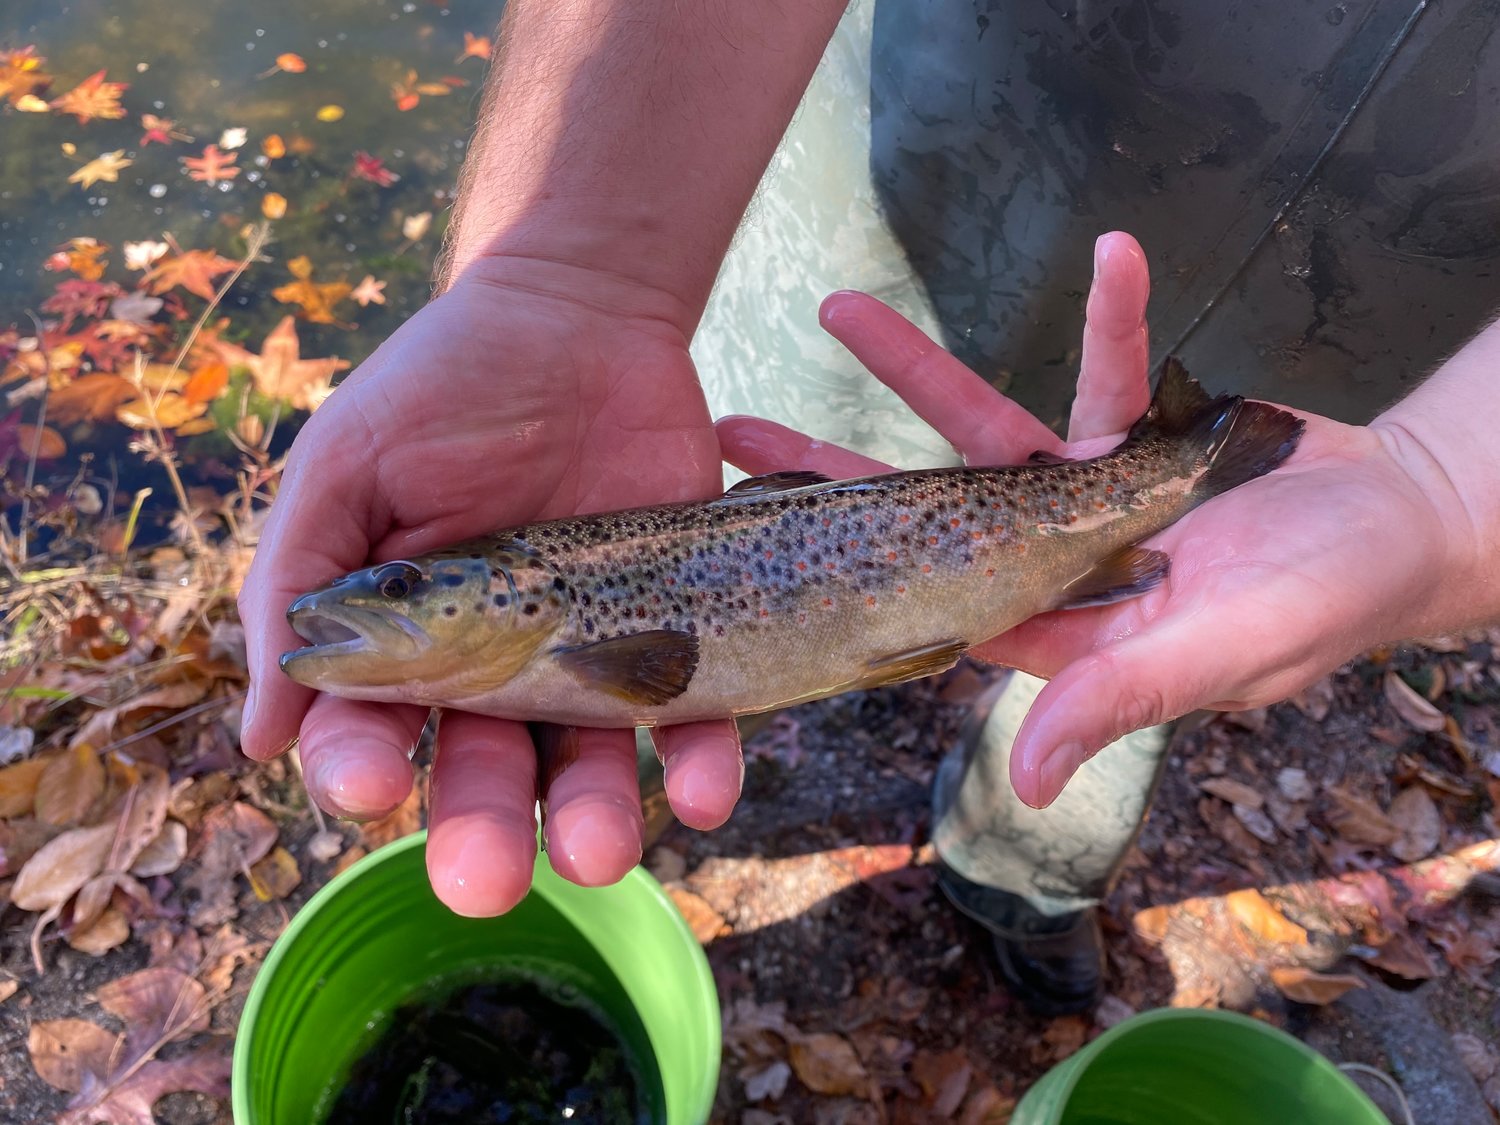 Brown trout were the species stocked on Nov. 3. Brown trout are more likely to survive through the winter than other species in the hatchery, and are selected to keep fishermen busy until spring.